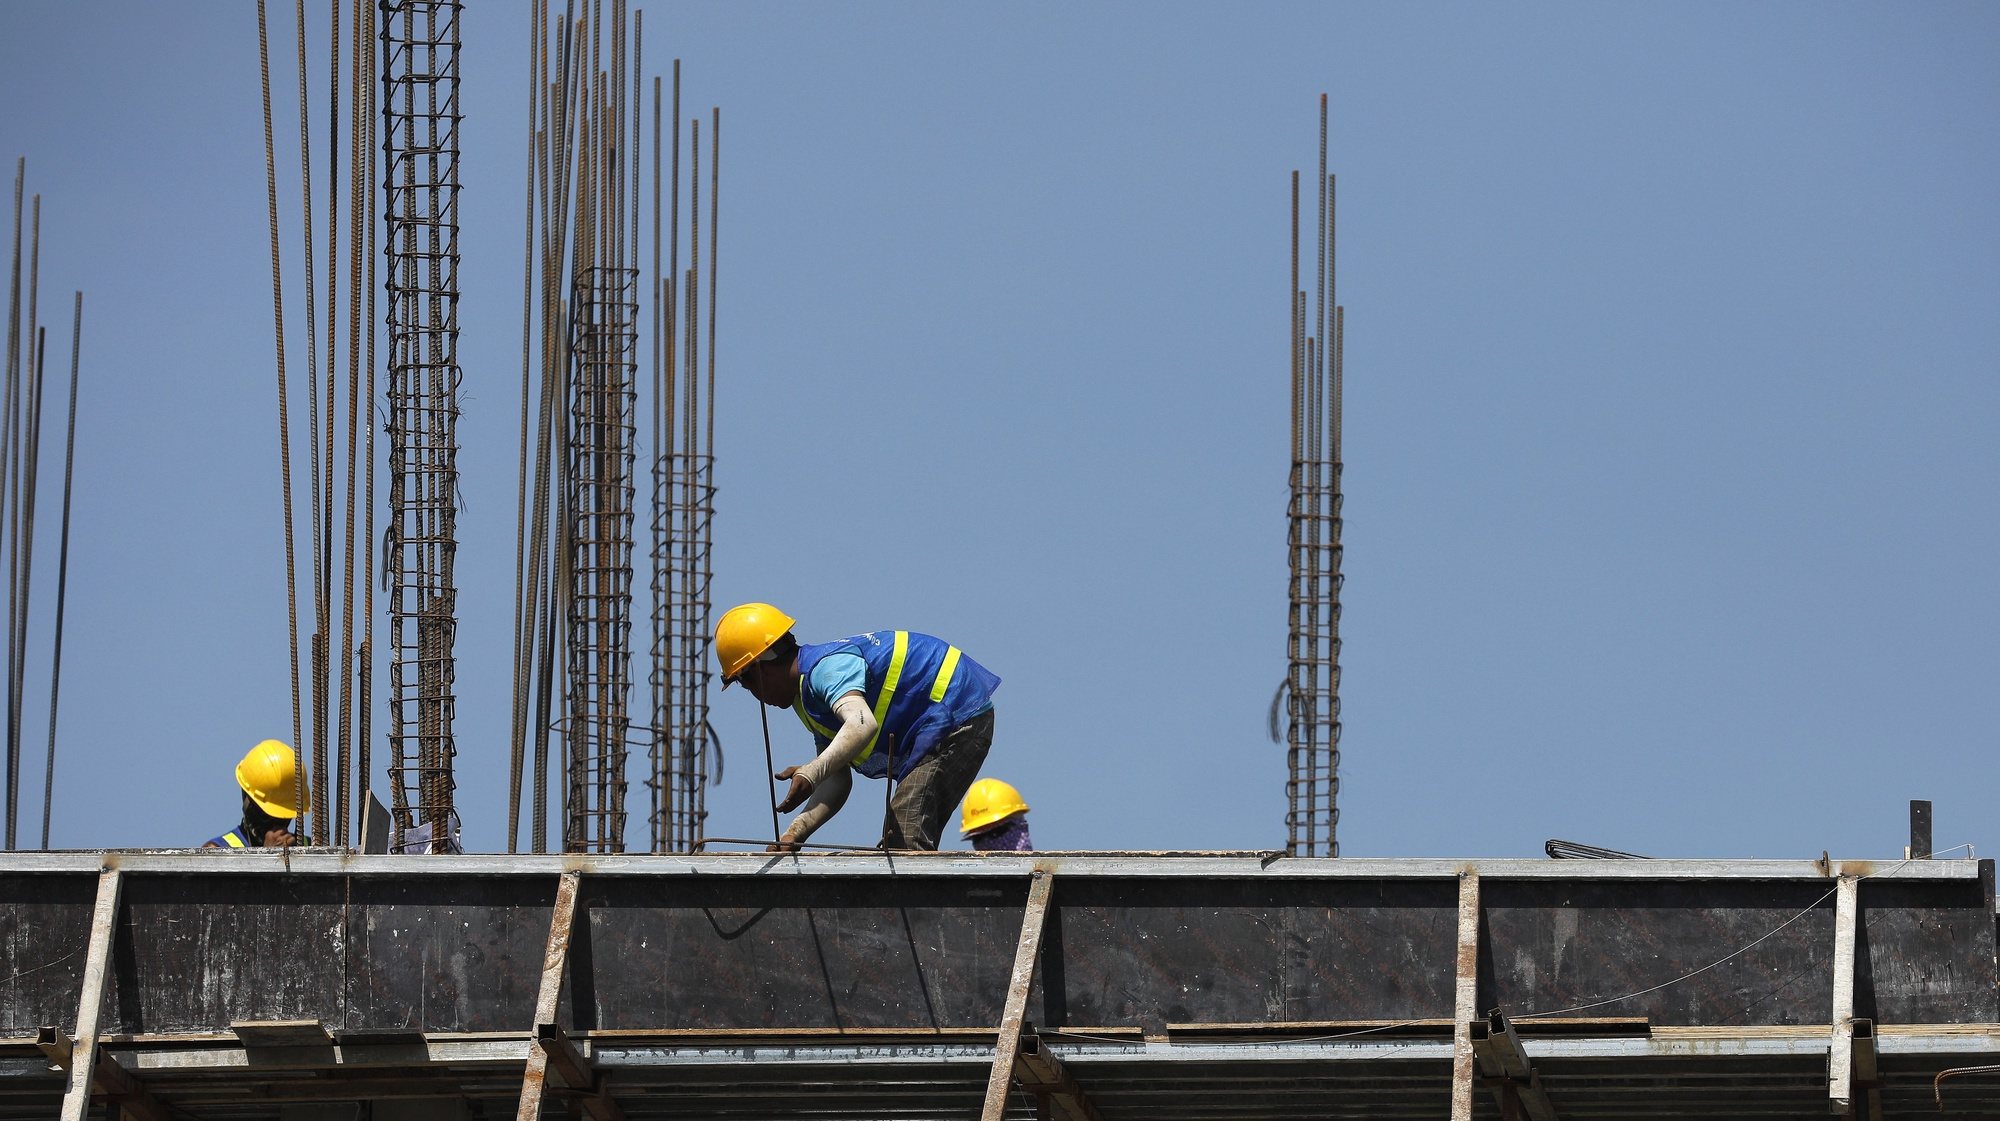 epa08534648 Laborers work at a construction site in Hanoi, Vietnam, 08 July 2020. Vietnam&#039;s GDP growth grew by 1.8 percent in the first half of 2020 due to the pandemic of the COVID-19 disease caused by the SARS-CoV-2 coronavirus, according to General Statistics Office (GSO).  EPA/LUONG THAI LINH